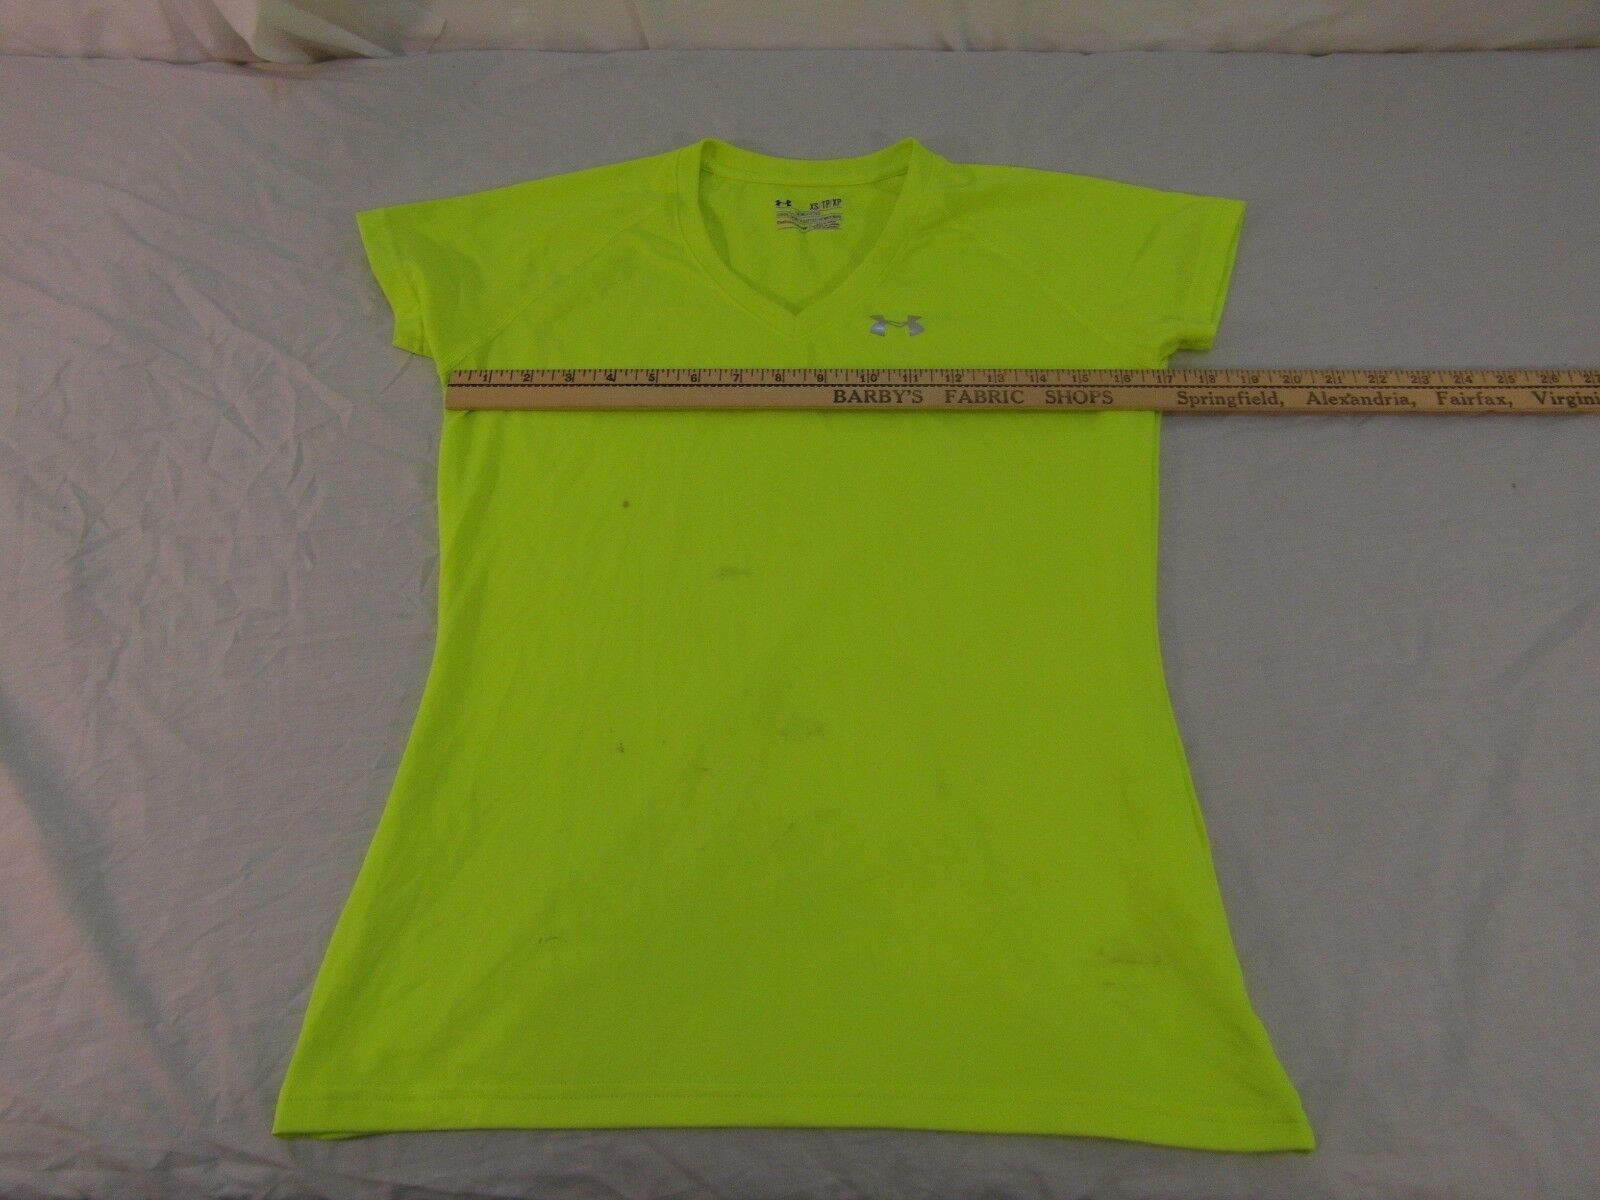 Primary image for Adult Women's Under Armour Semi-Fitted Hear Gear Tennis Ball Green Top 30360